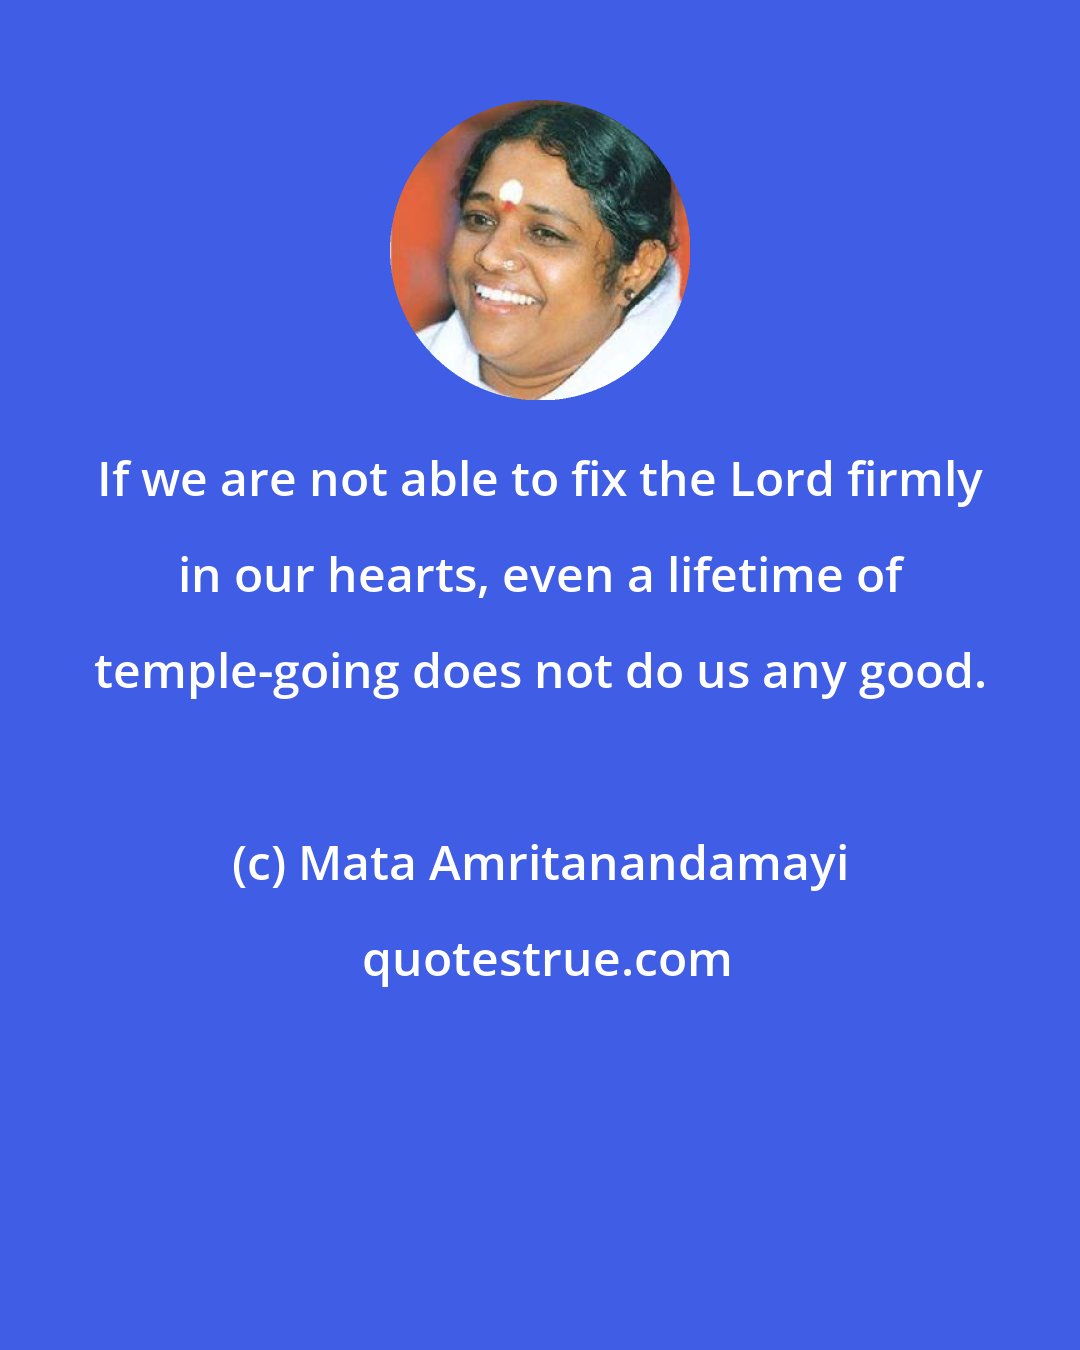 Mata Amritanandamayi: If we are not able to fix the Lord firmly in our hearts, even a lifetime of temple-going does not do us any good.